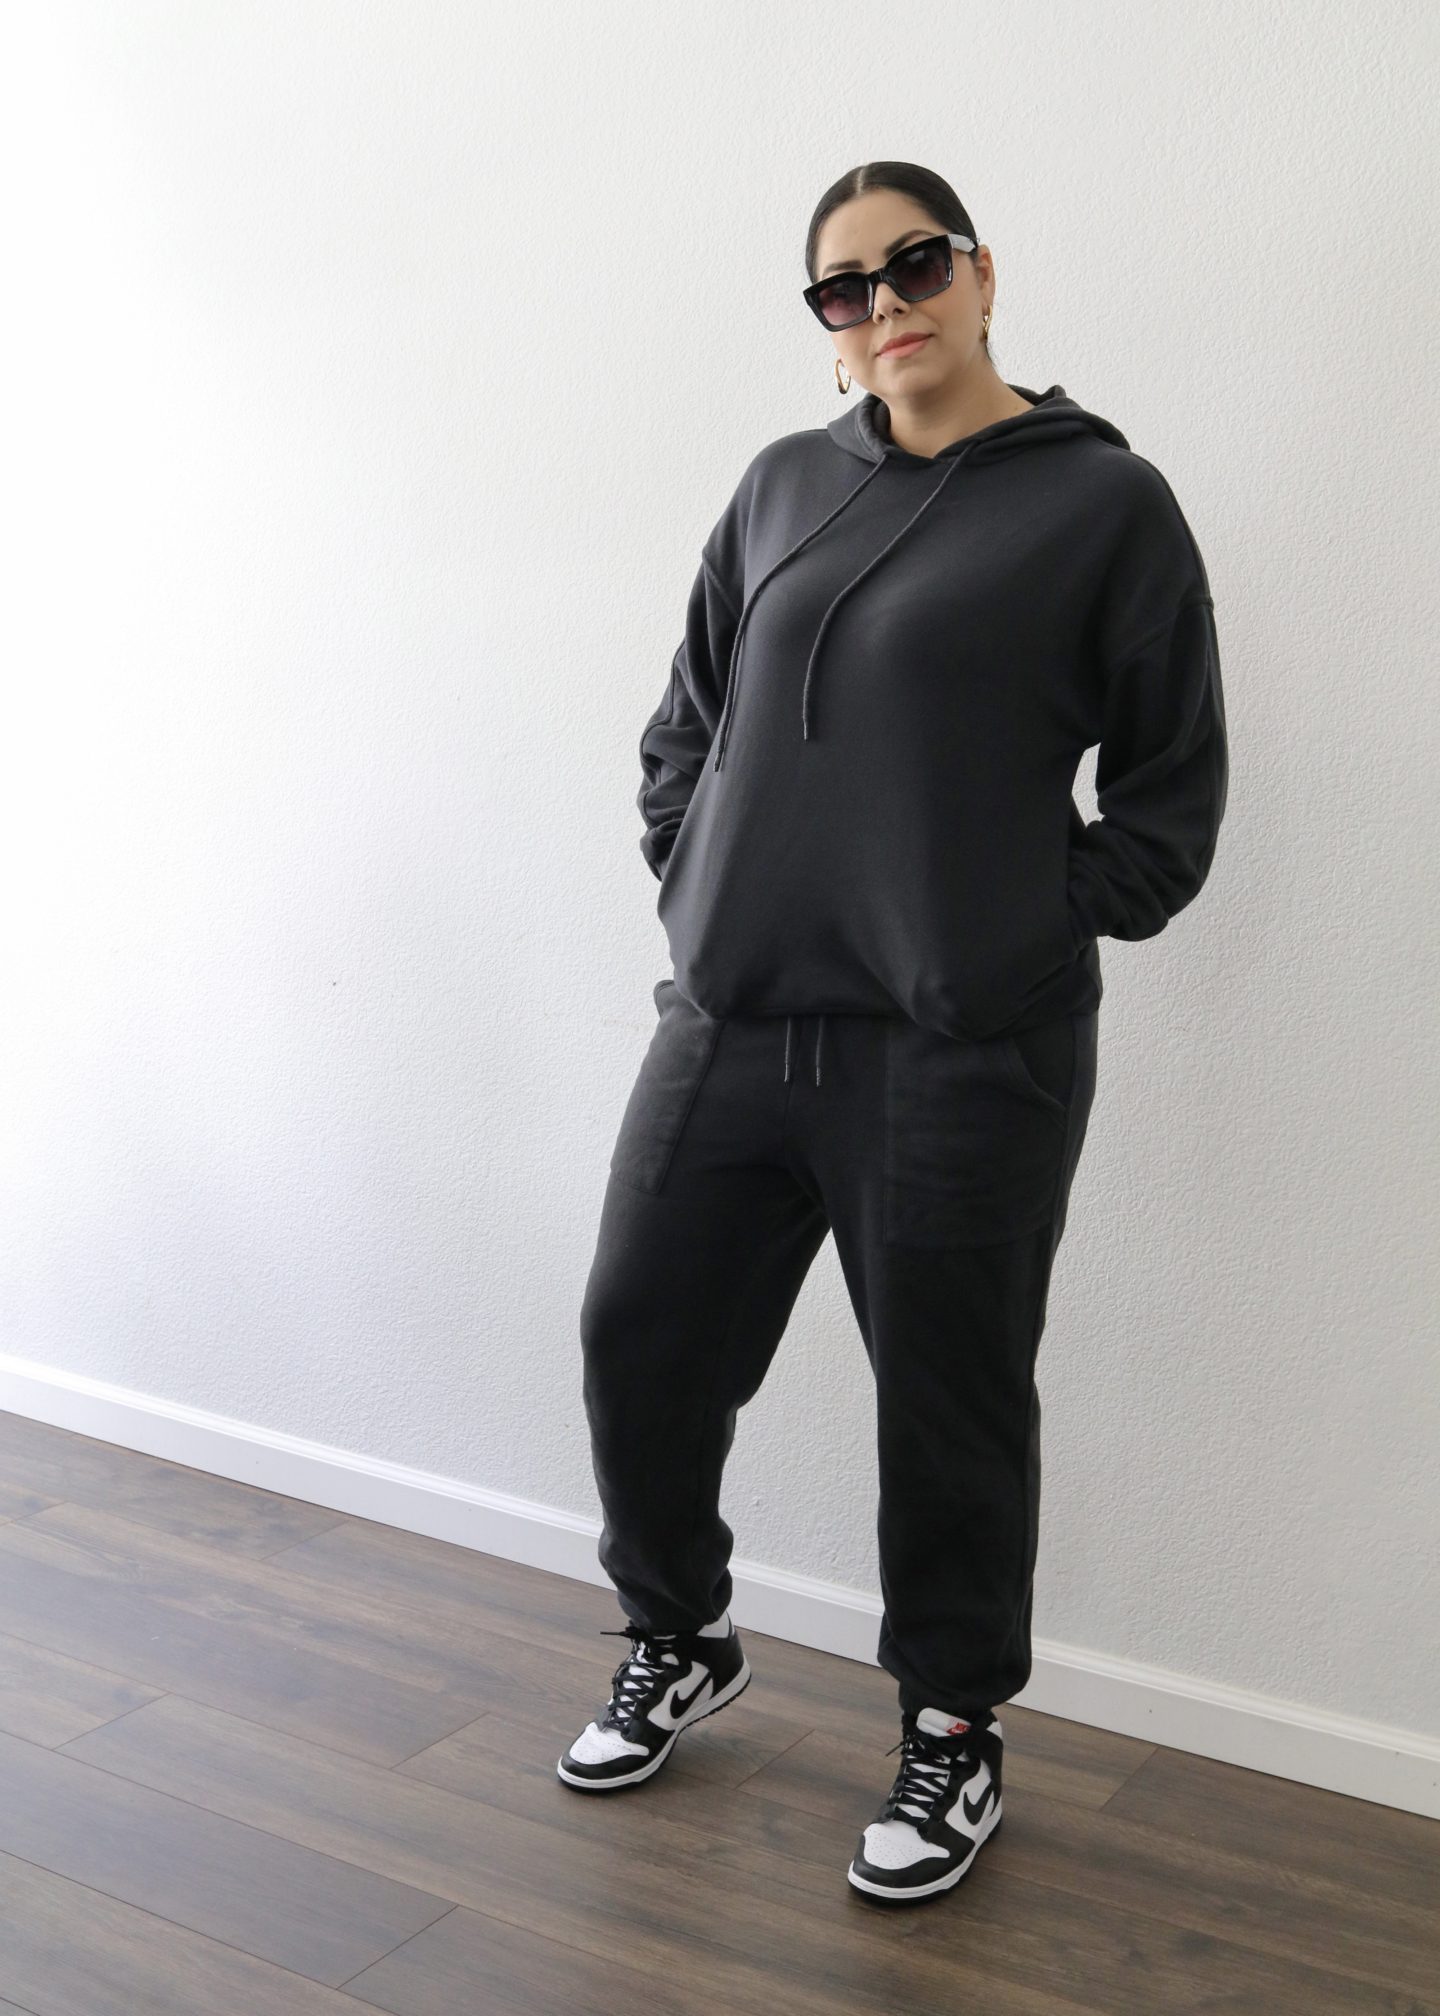 women dunks high outfit idea, latina style creator, casual mid size outfit idea, black oversized hoodie outfit for women